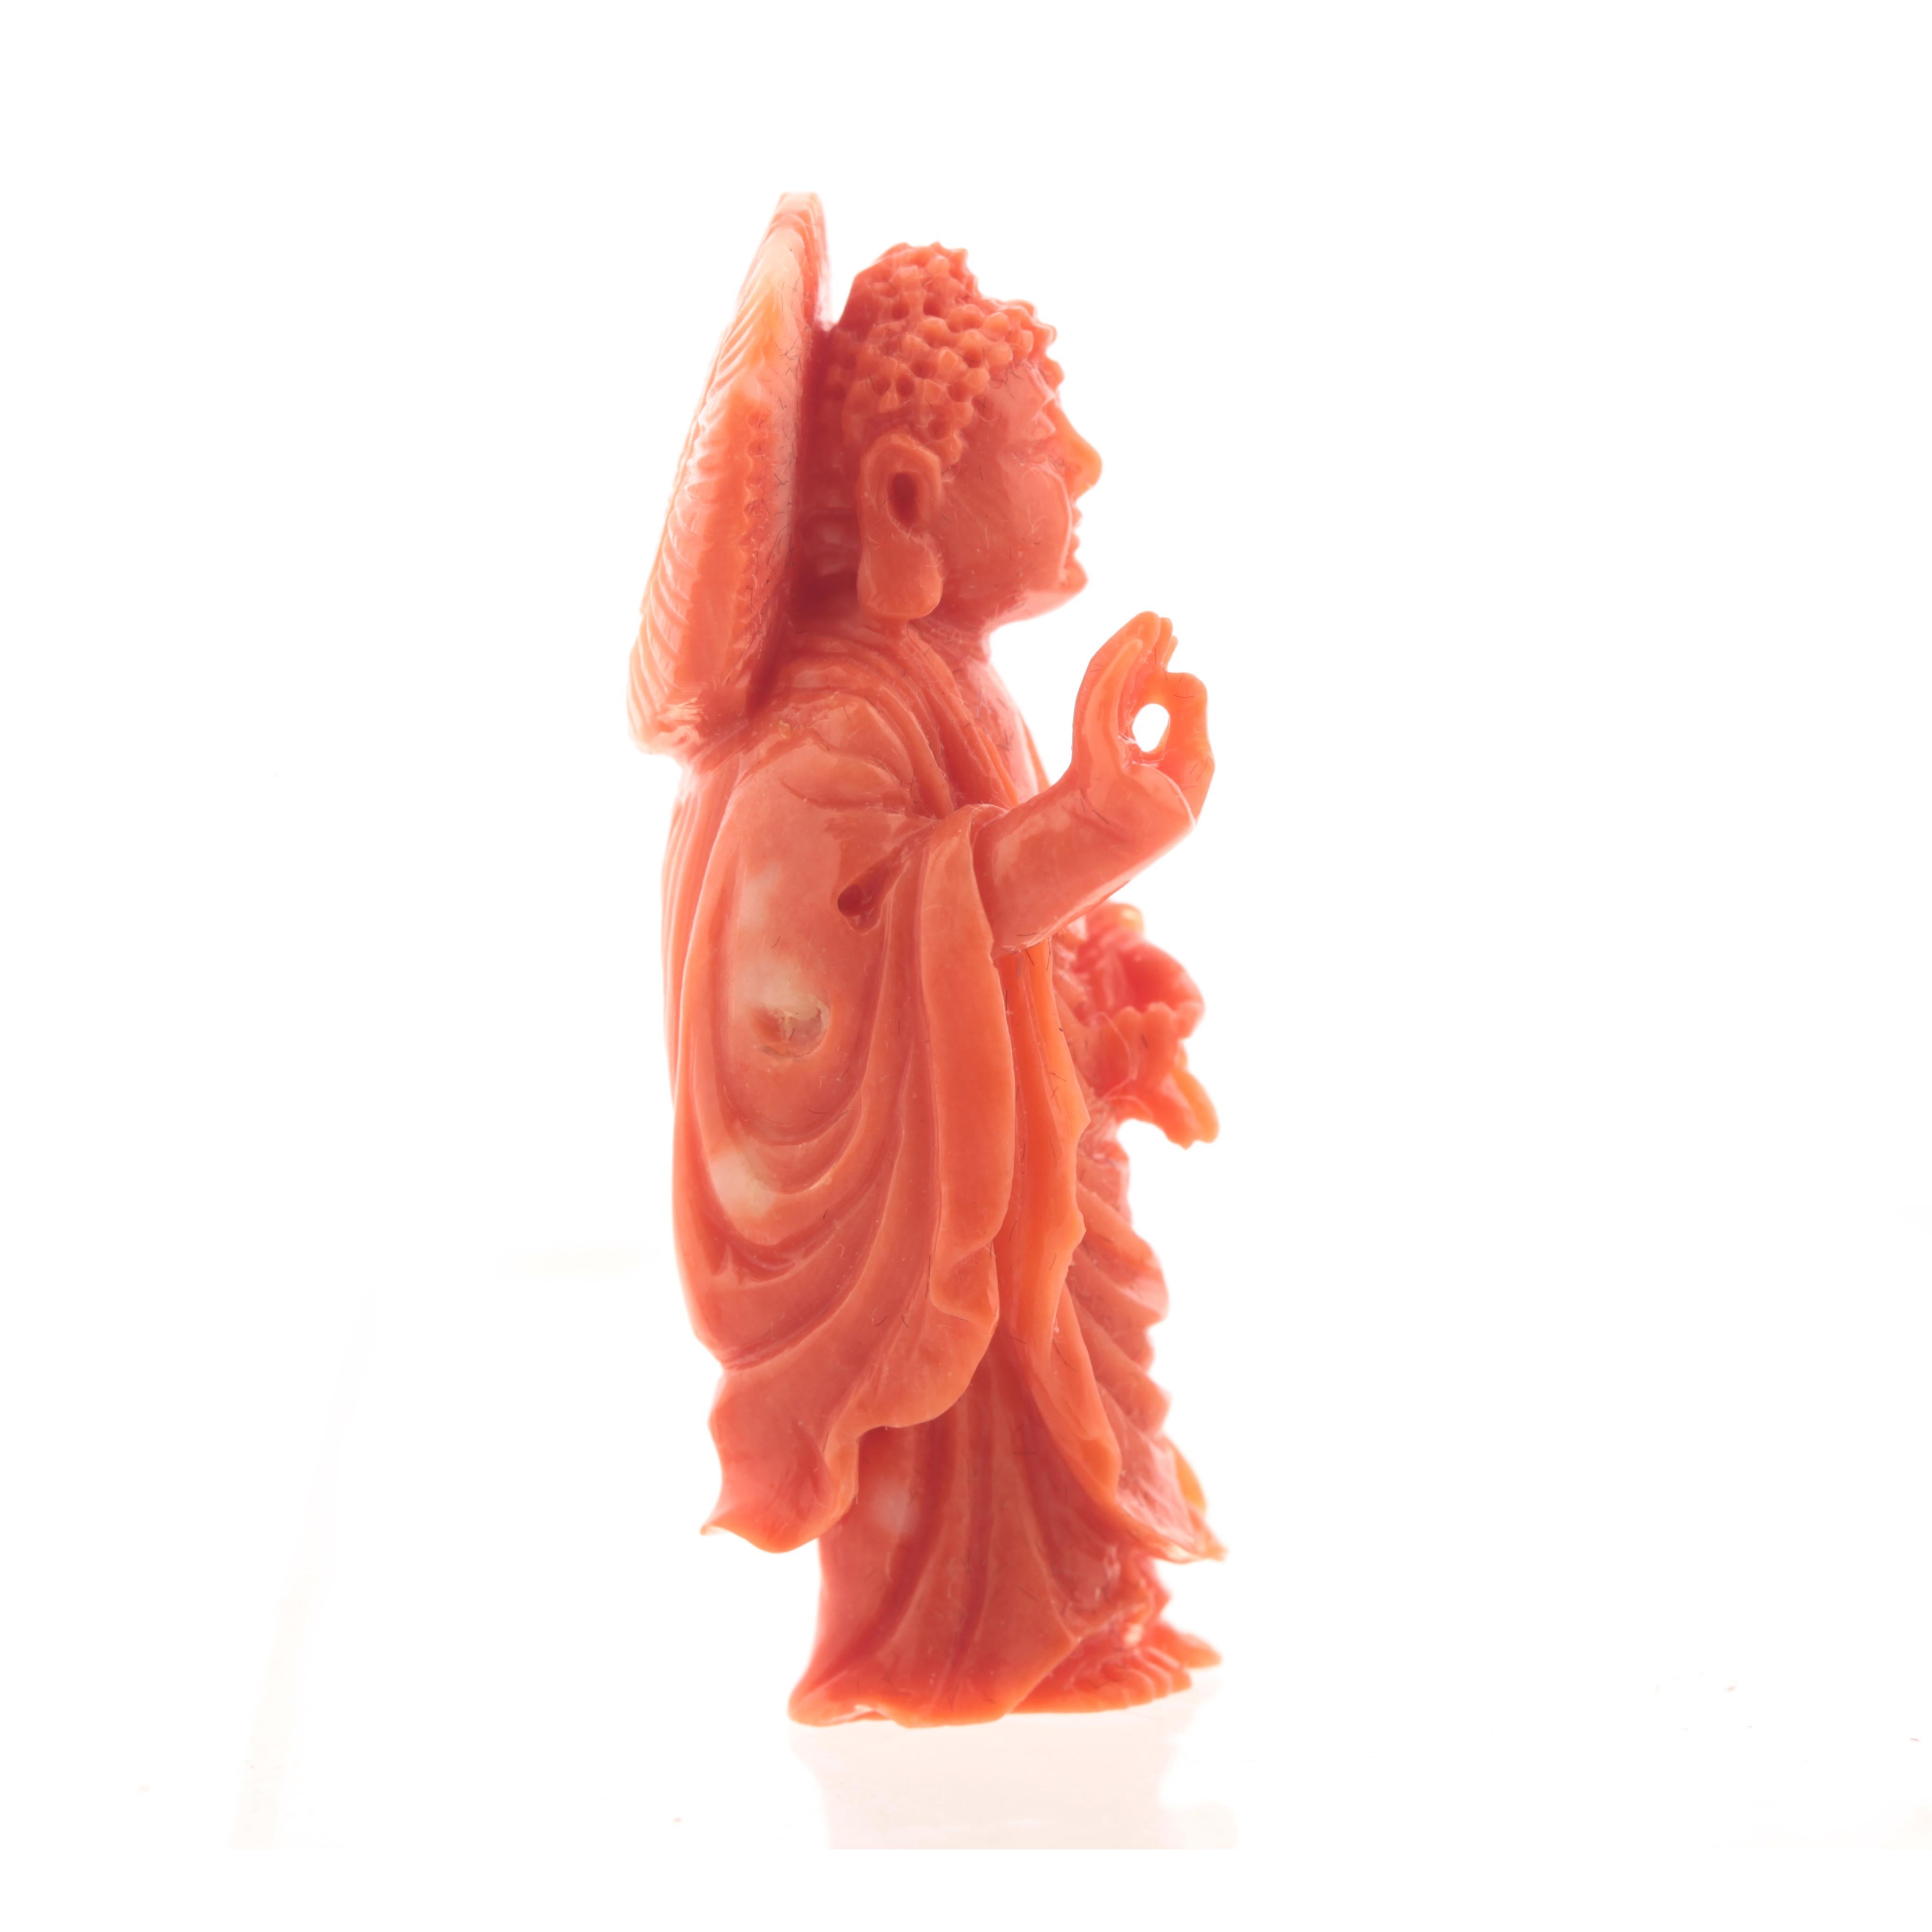 Chinese Export Buddhist Monk Carved Asian Decorative Art Statue Sculpture Natural Red Coral For Sale